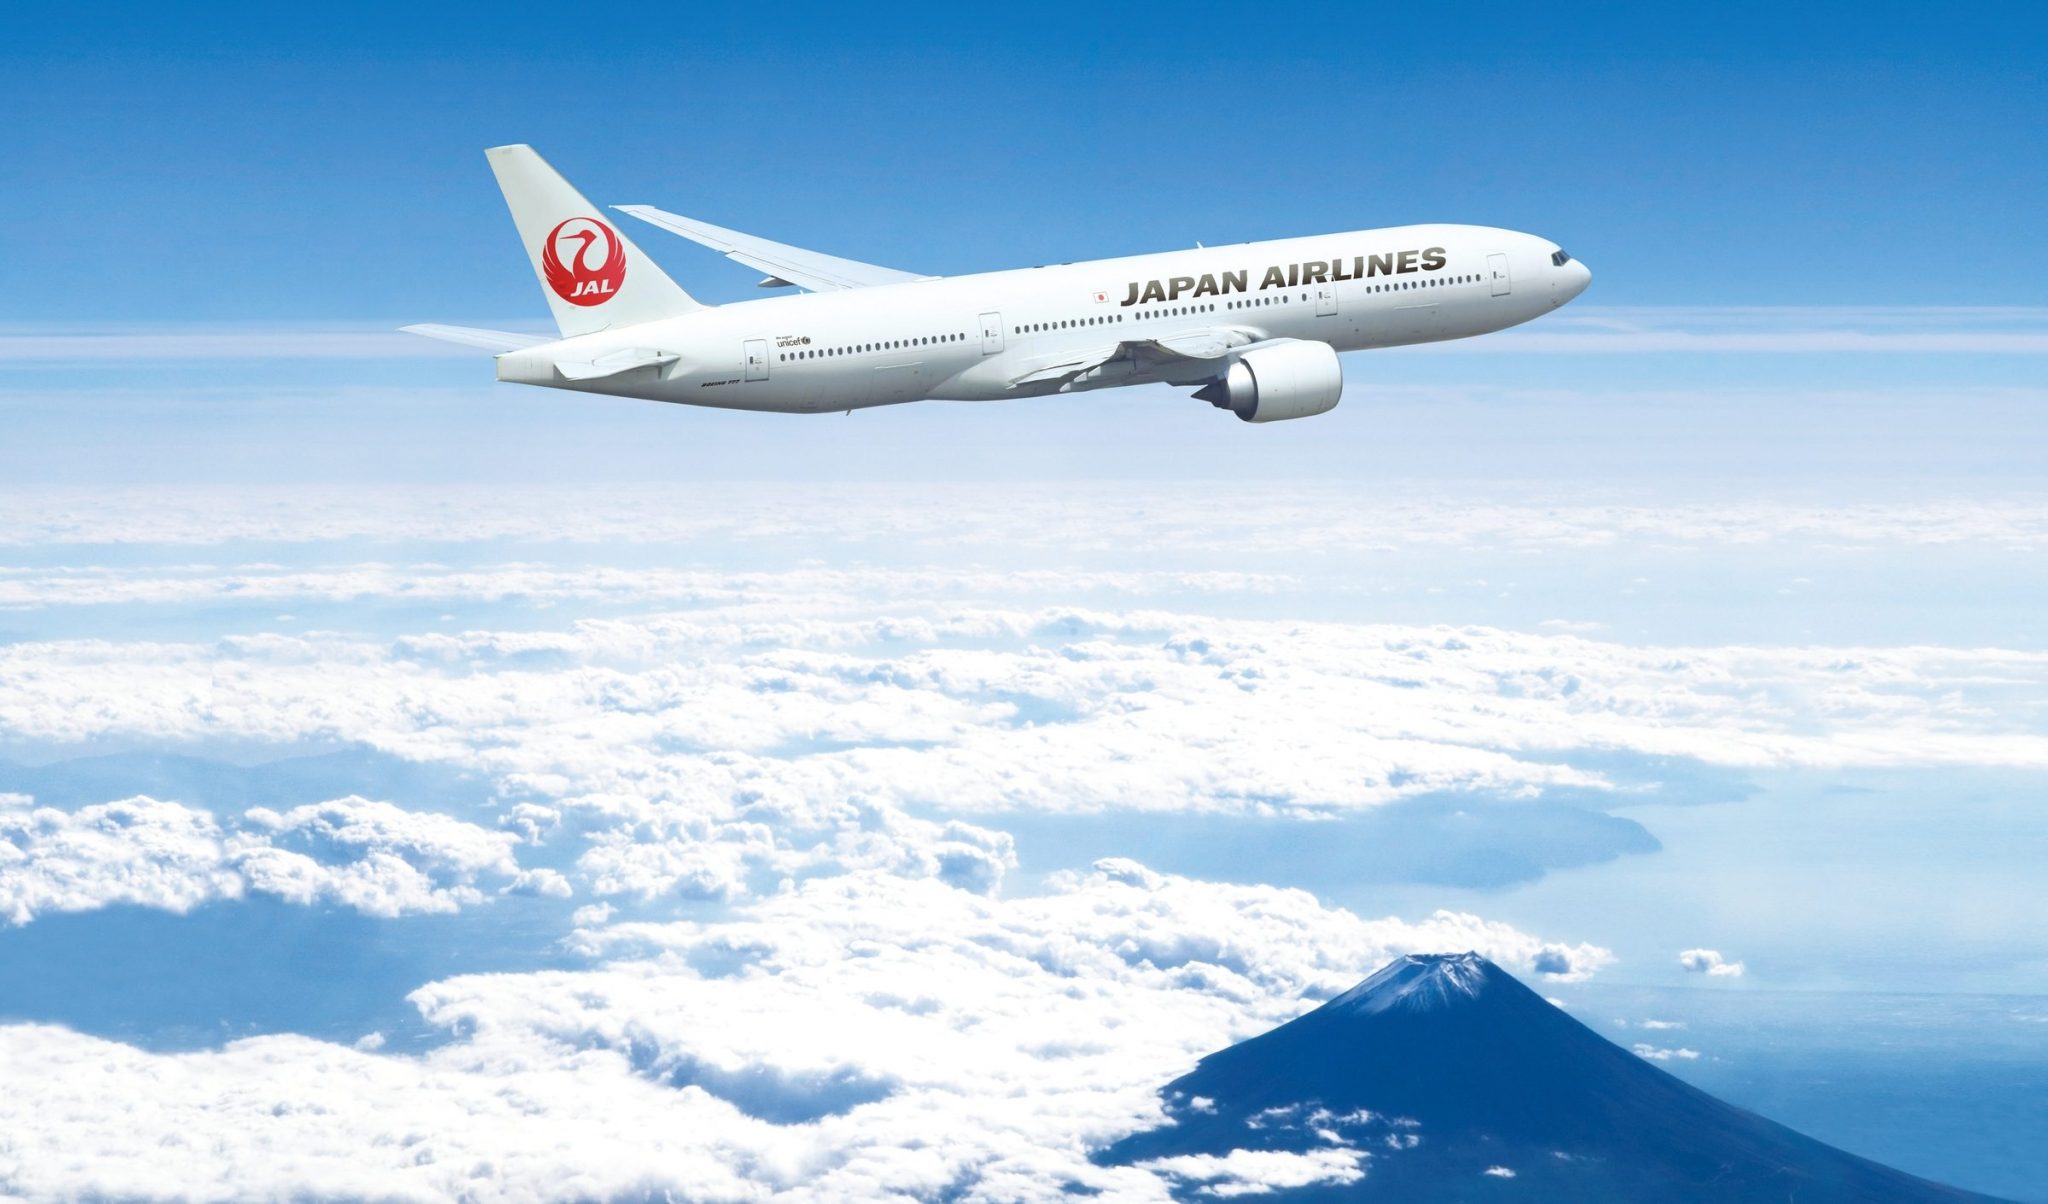 Japan Airlines Introducing Free WiFi On All Domestic Flights